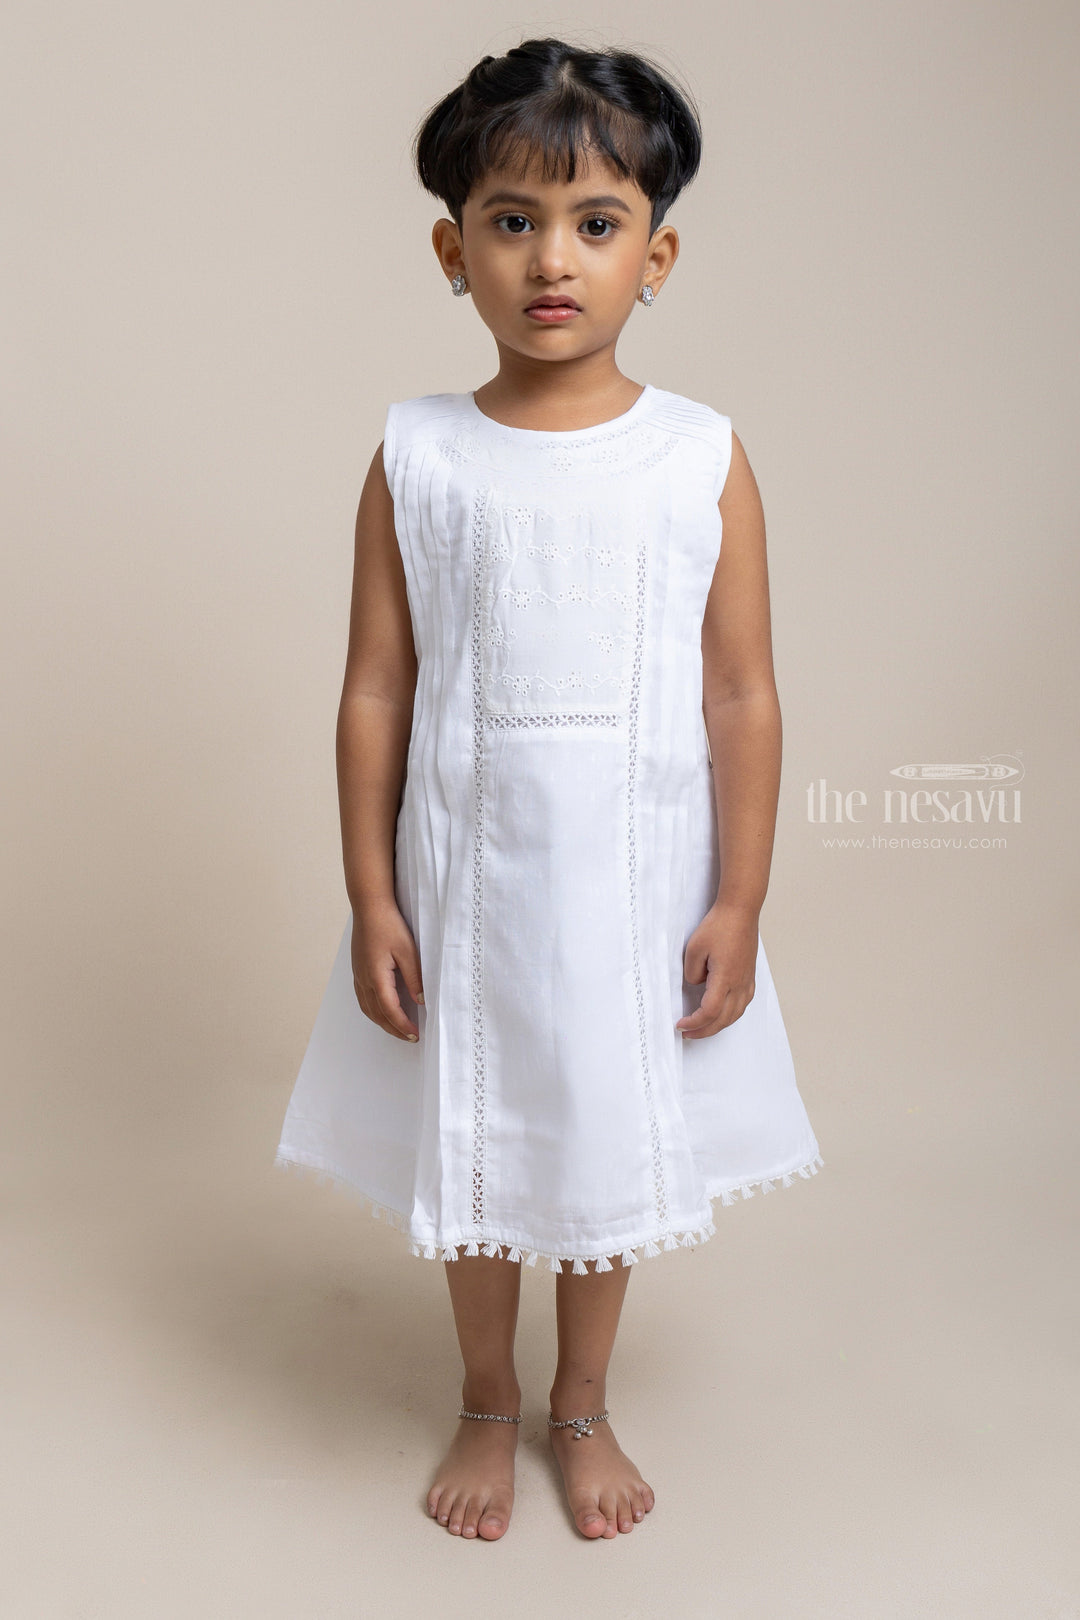 The Nesavu Girls Cotton Frock Beautiful White Floral Designed Sleeveless Cotton Frock for Girls Nesavu 22 (4Y) / White / Cotton GFC1024A Attractive Girls Cotton Frock | Trendy Cotton Frock | The Nesavu